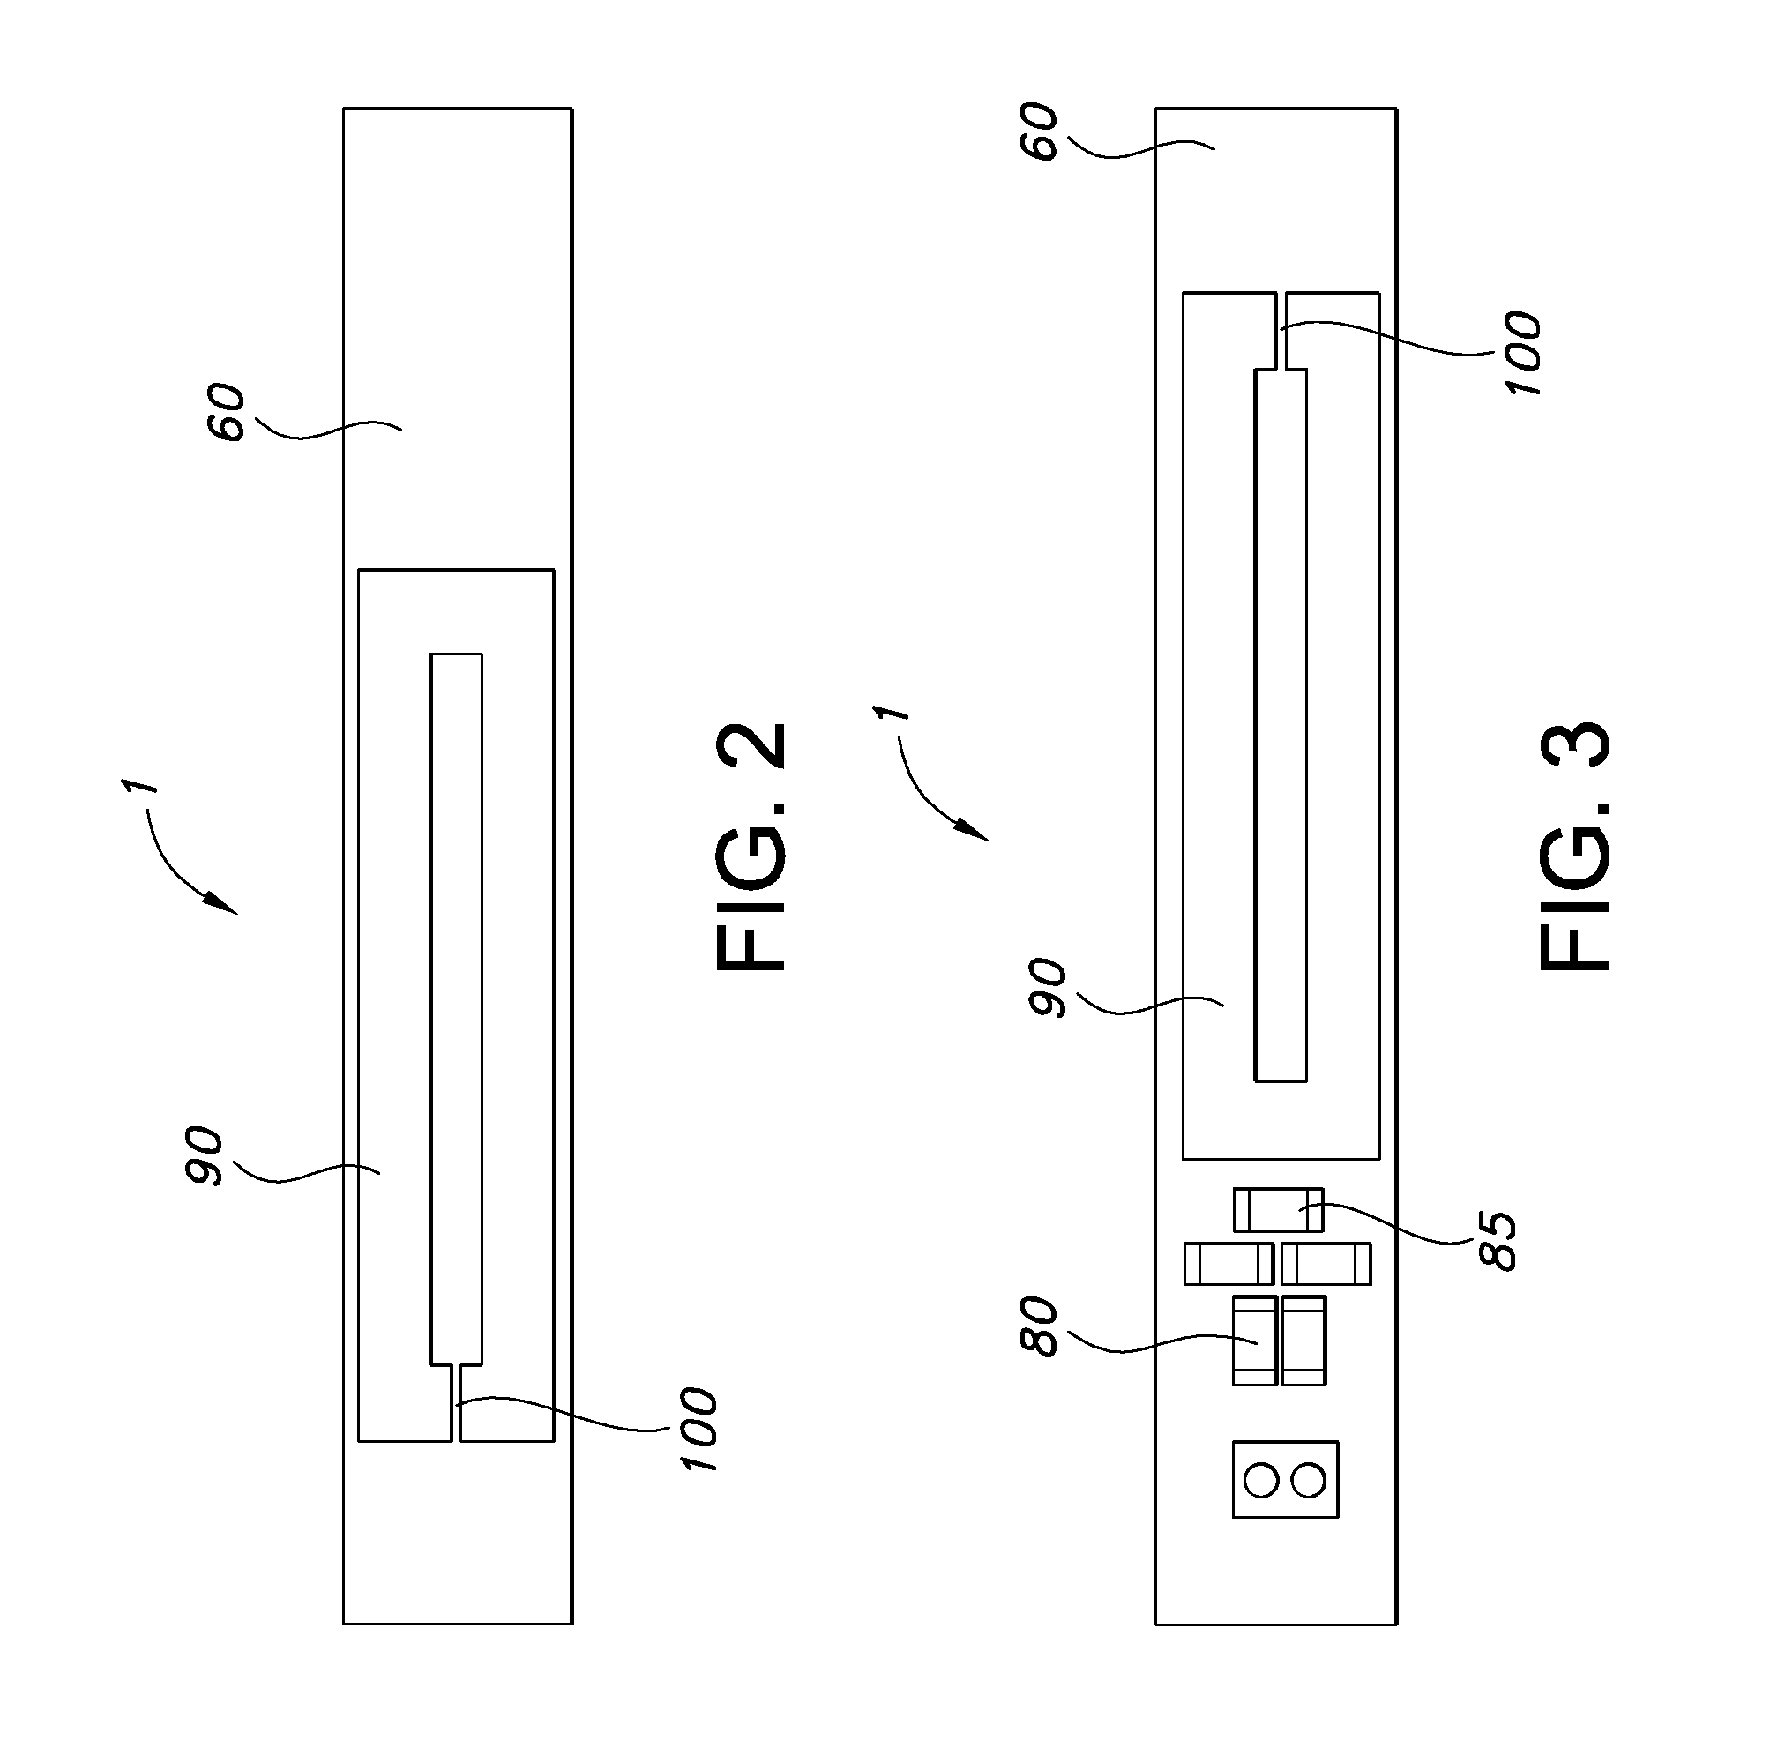 System and Method for Selective Communication with RFID Transponders